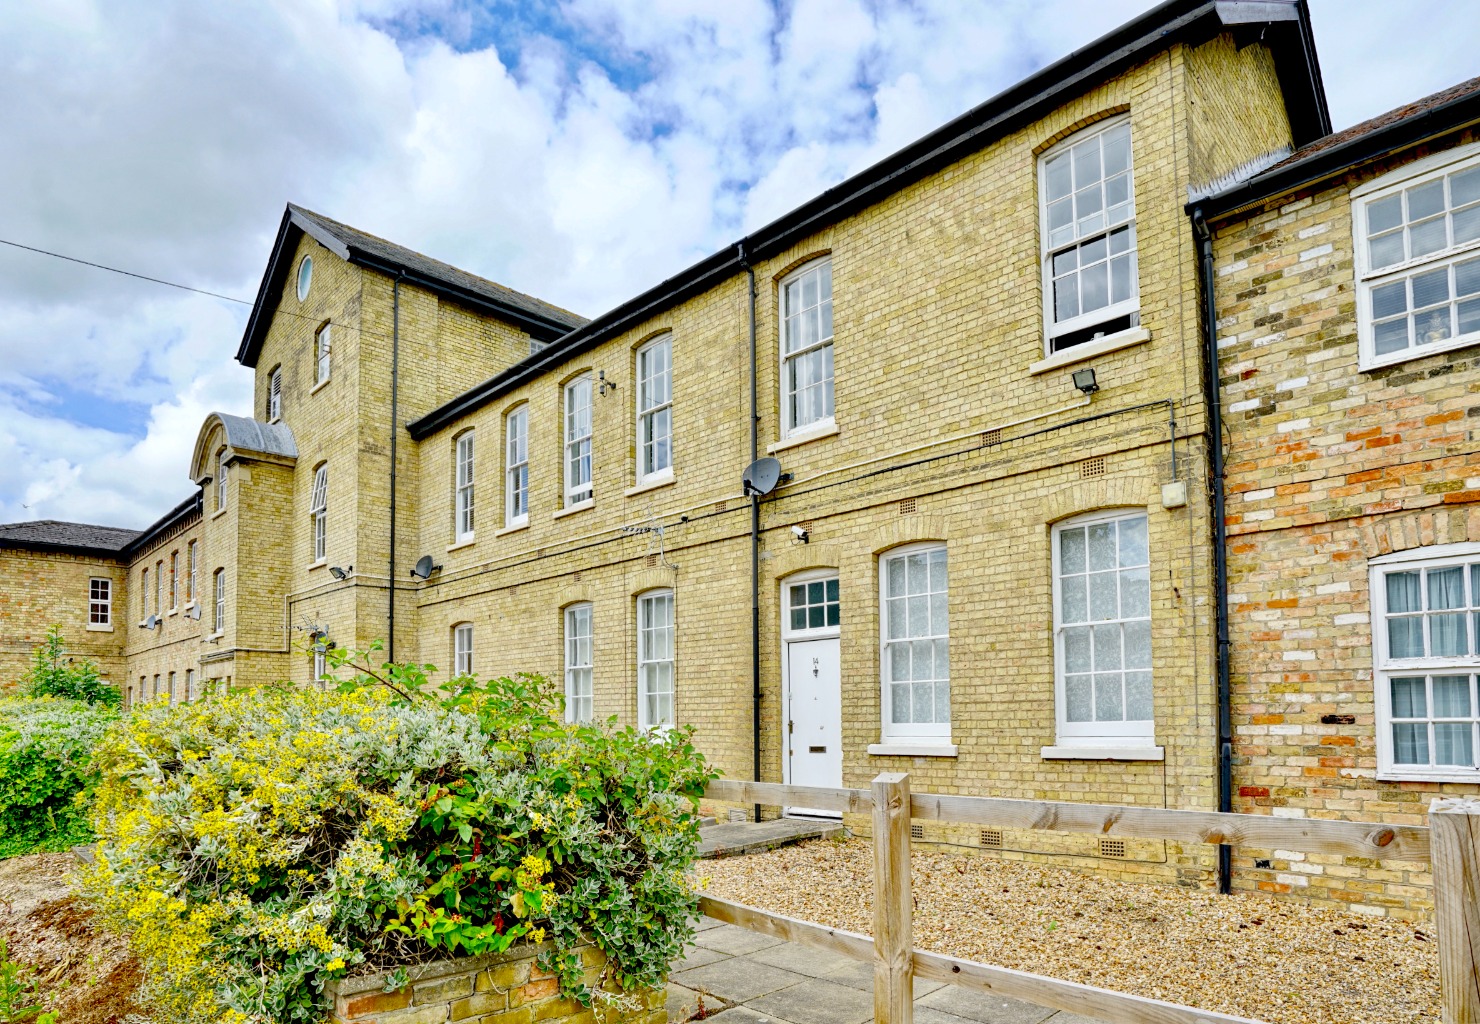 1 bed ground floor flat for sale in Linclare Place, St. Neots - Property Image 1